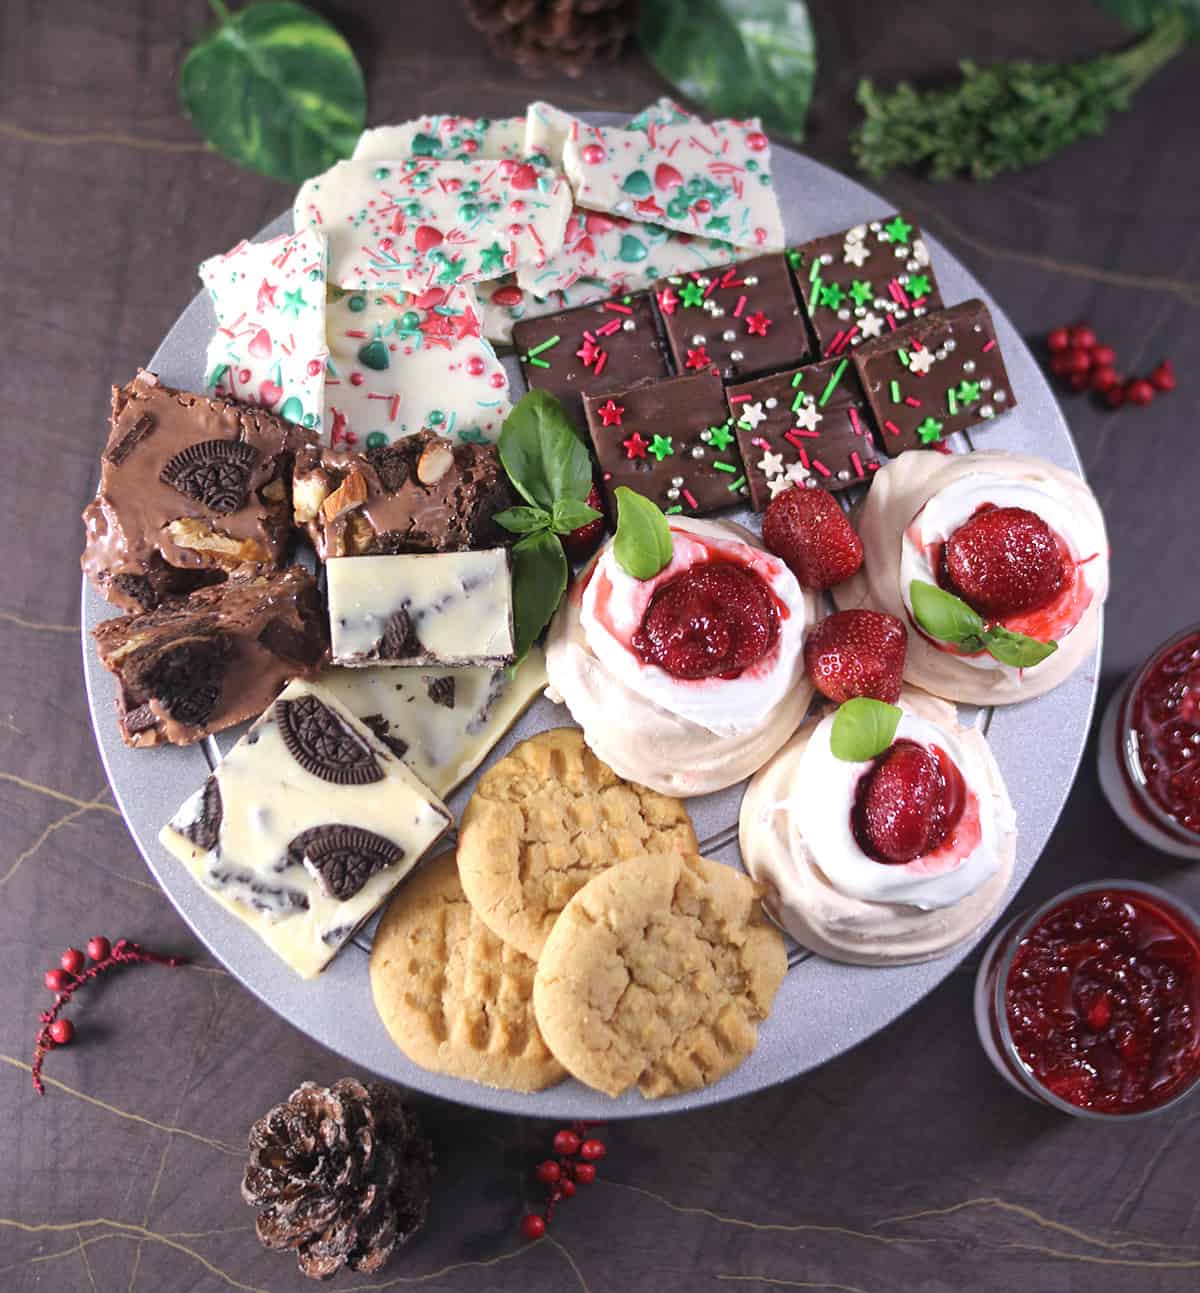 Best and easy charcuterie dessert board, Christmas party desserts ideas, holiday treats and gifts